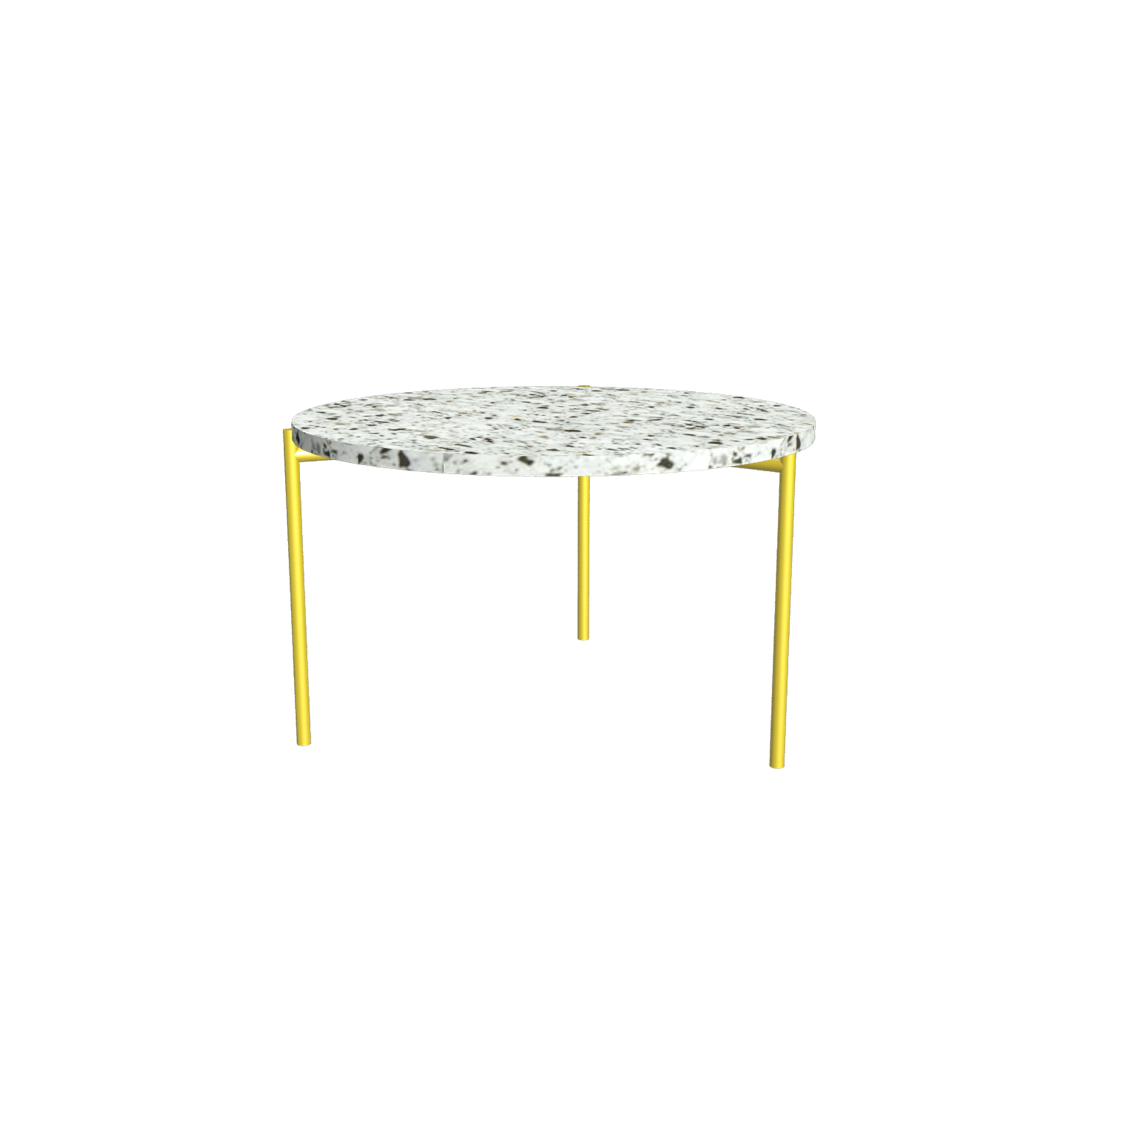 COFFEE TABLE, ROUND, SMALL - Customer's Product with price 2600.00 ID FiGrdeoGV3J5hso5caVqPNvl